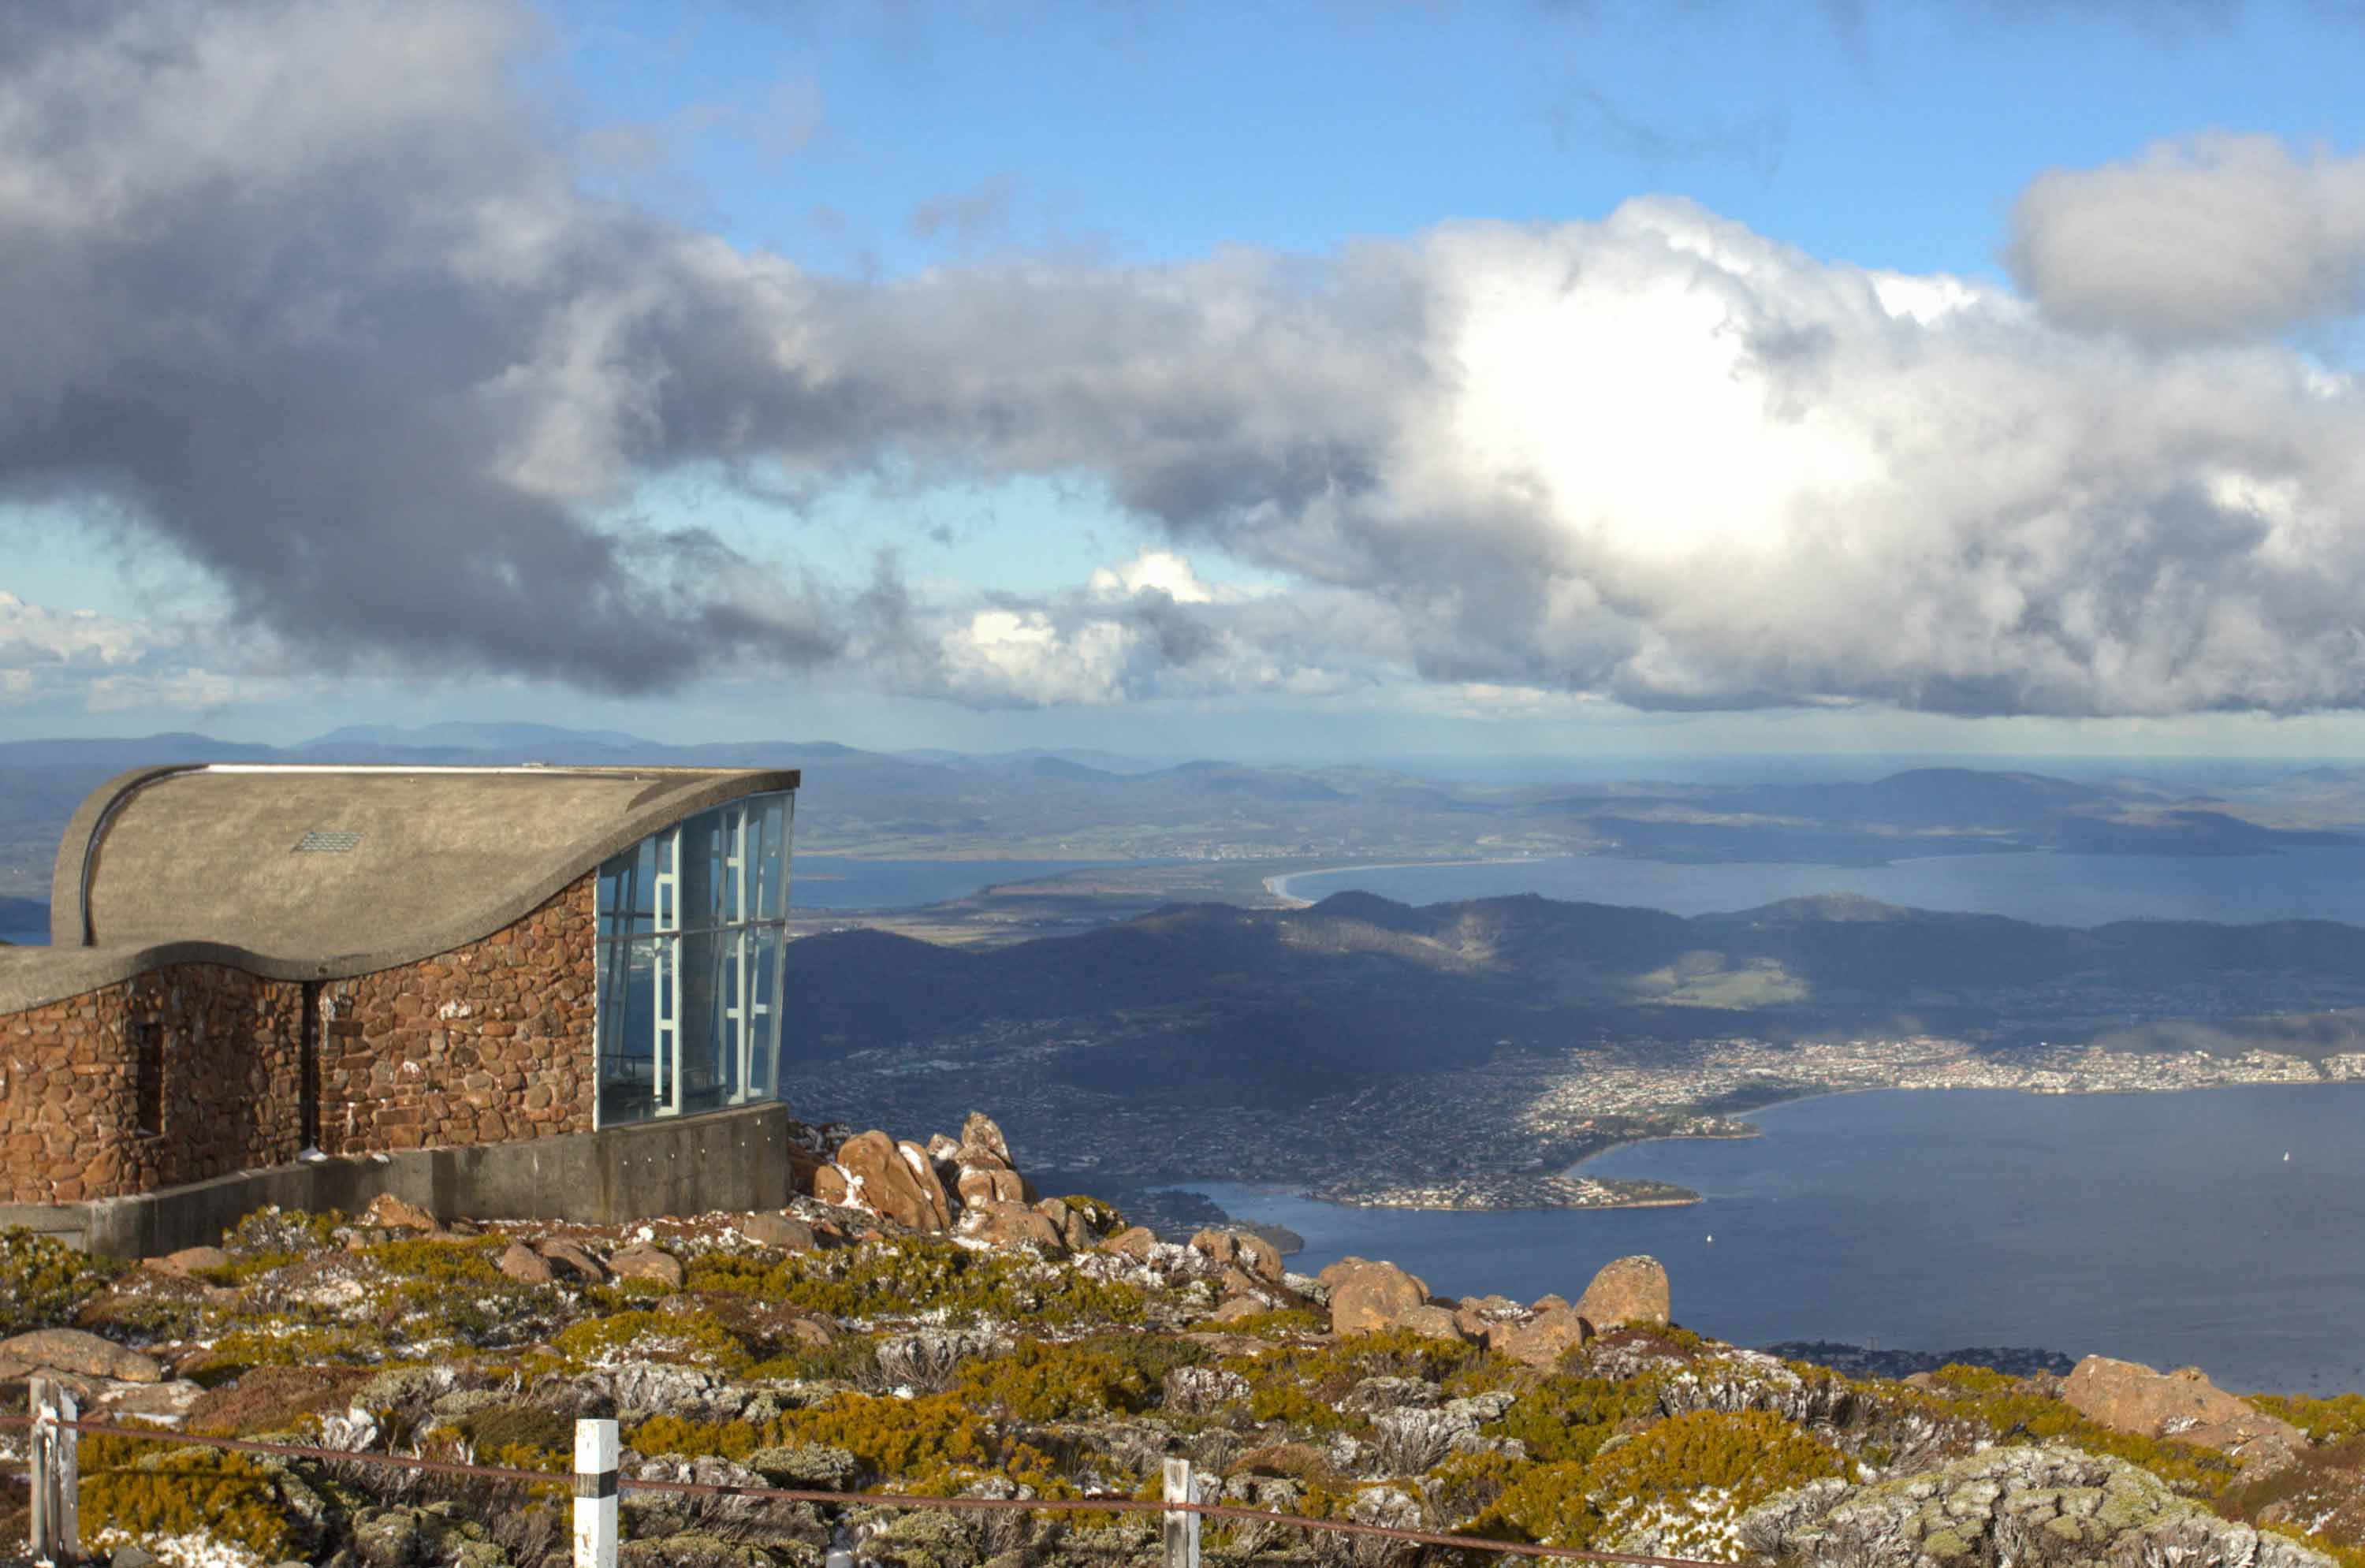 A stone building sits on the crest of a tall mountain looking down at Hobart and the Derwent River.